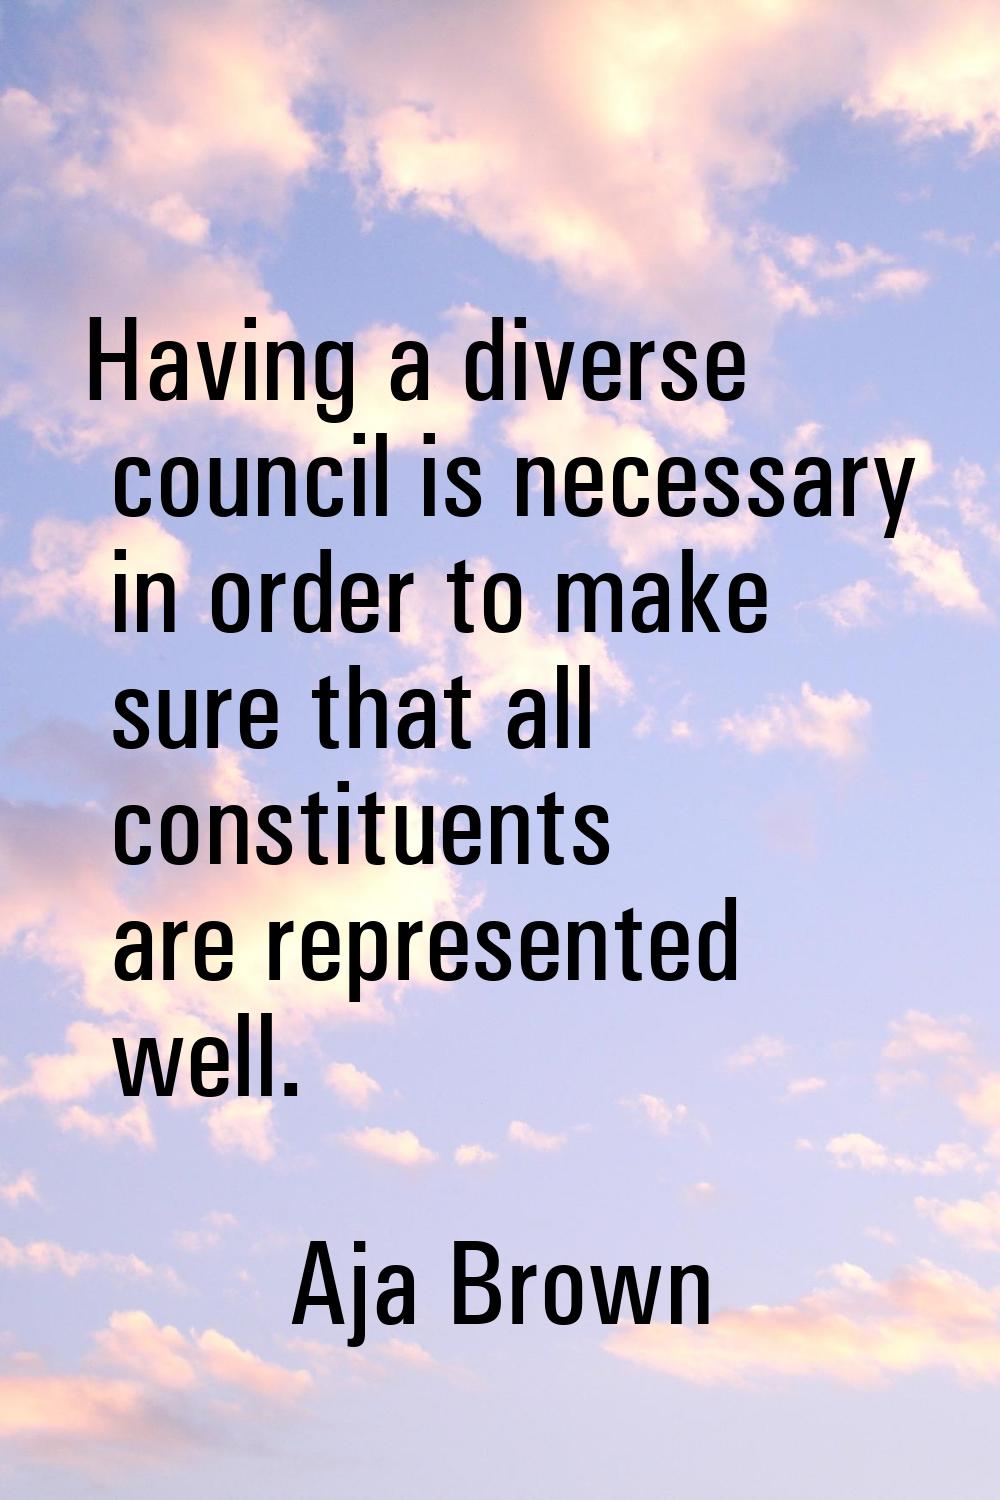 Having a diverse council is necessary in order to make sure that all constituents are represented w